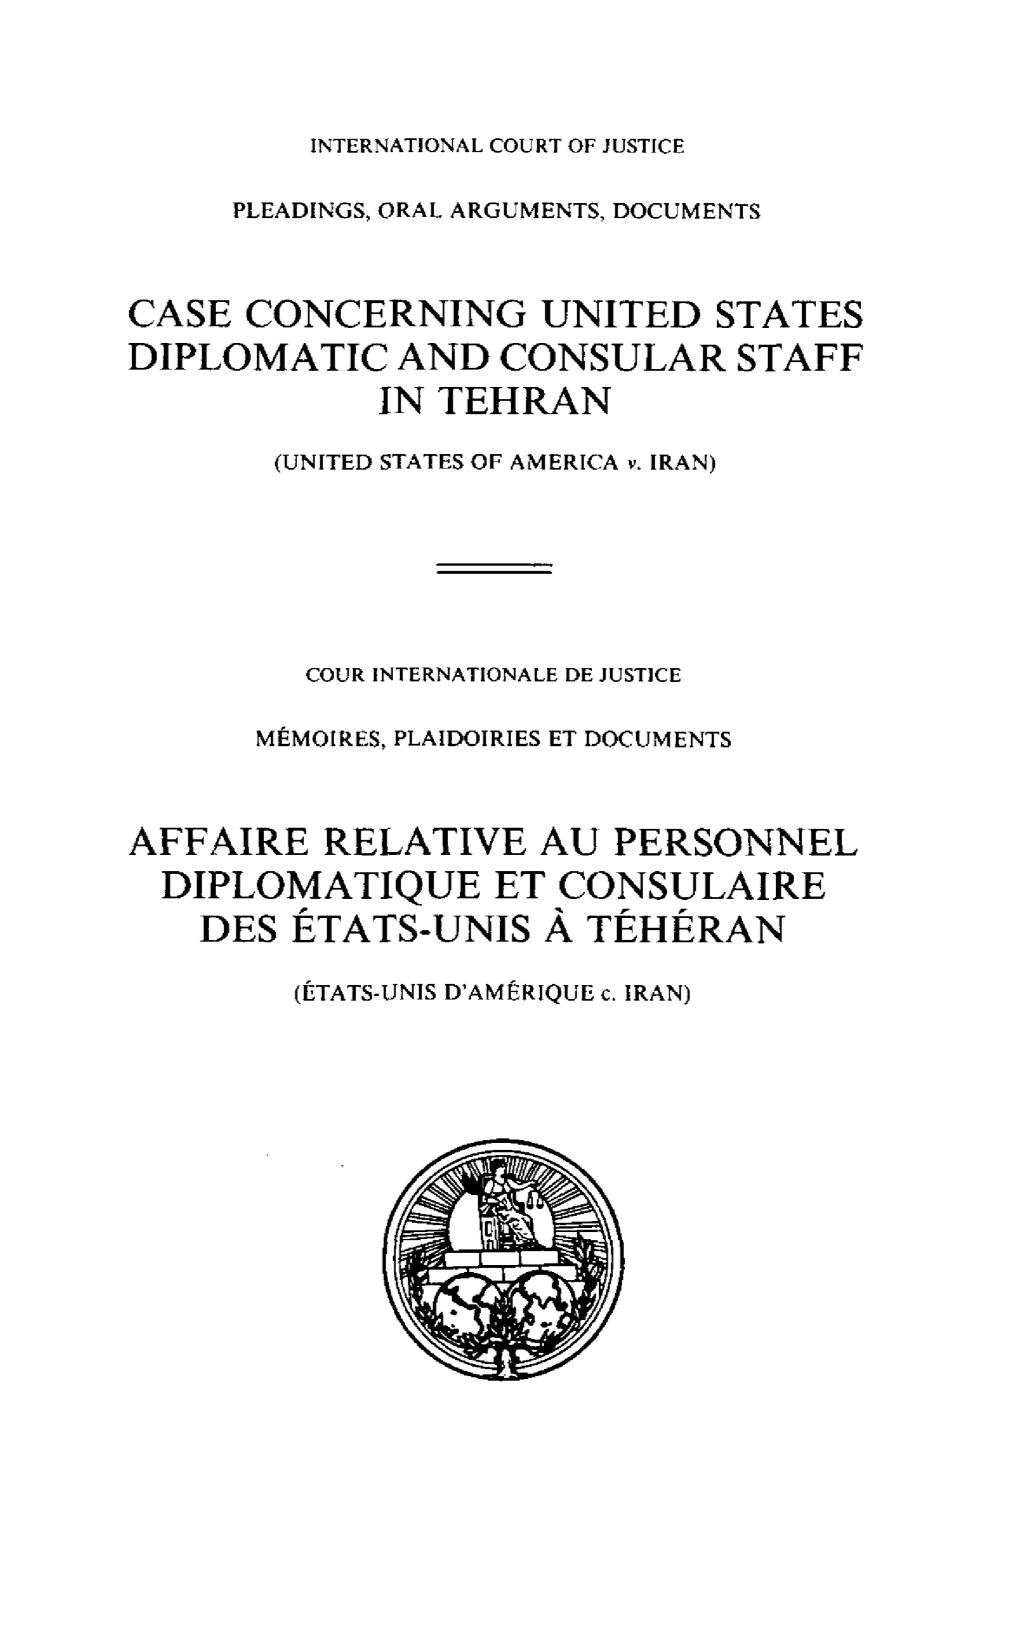 Case Concerning United States Diplomatic and Consuear Staff 1N Tehran